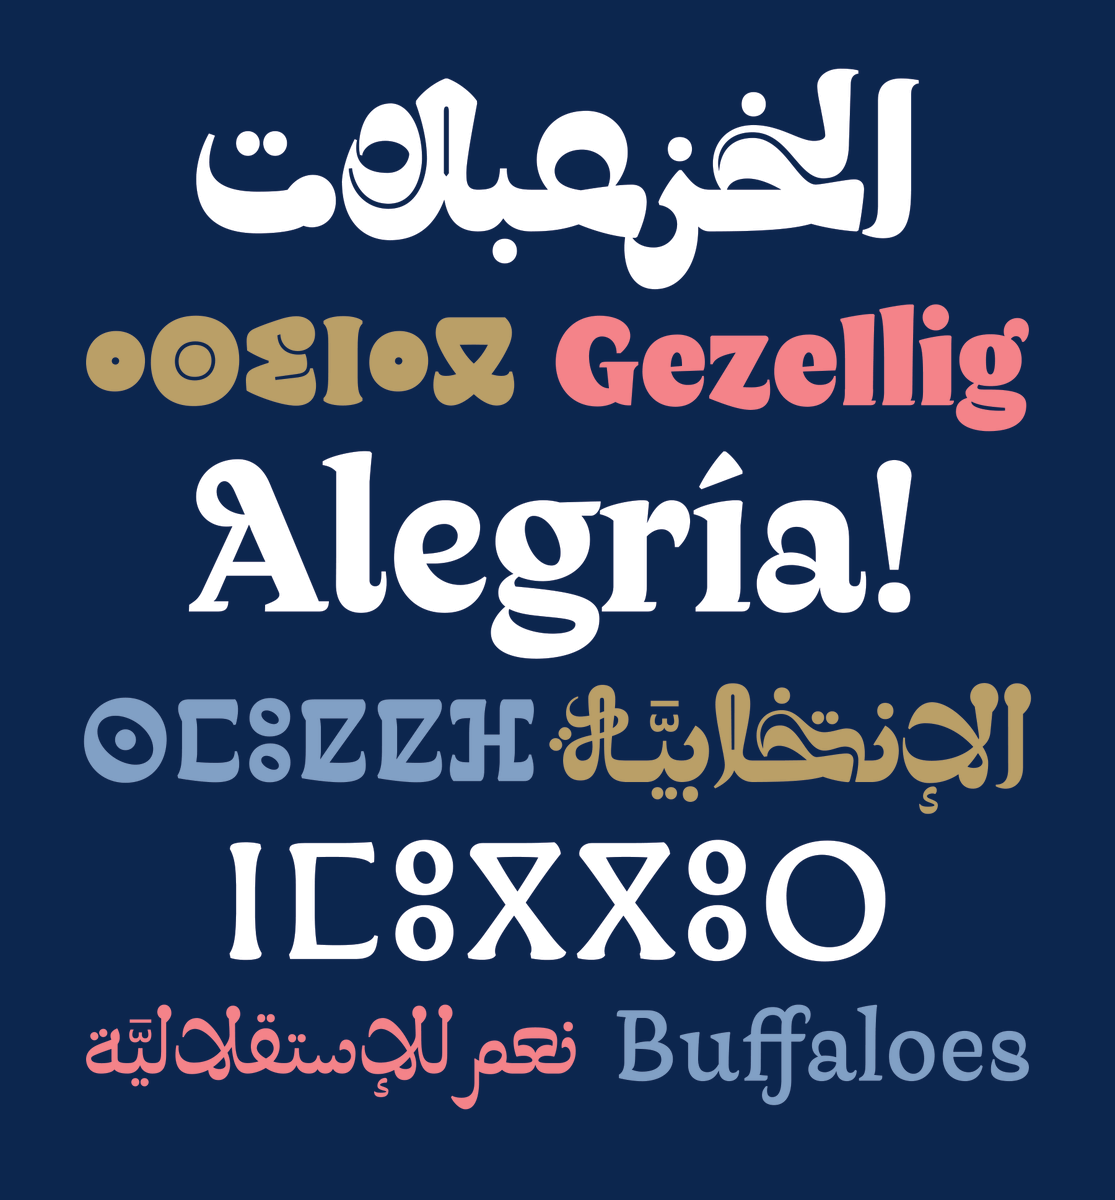 Of course, the Maghribi script family continues to be a living tradition, so let's follow up with a on contemporary typefaces (please reply with others you know of):First has to be  @laurameseguer's stunning Qandus, a "Typographic Maghribi Trialogue" https://www.laurameseguer.com/project/qandus 1/5  https://twitter.com/PressTaras/status/1277561024330285056